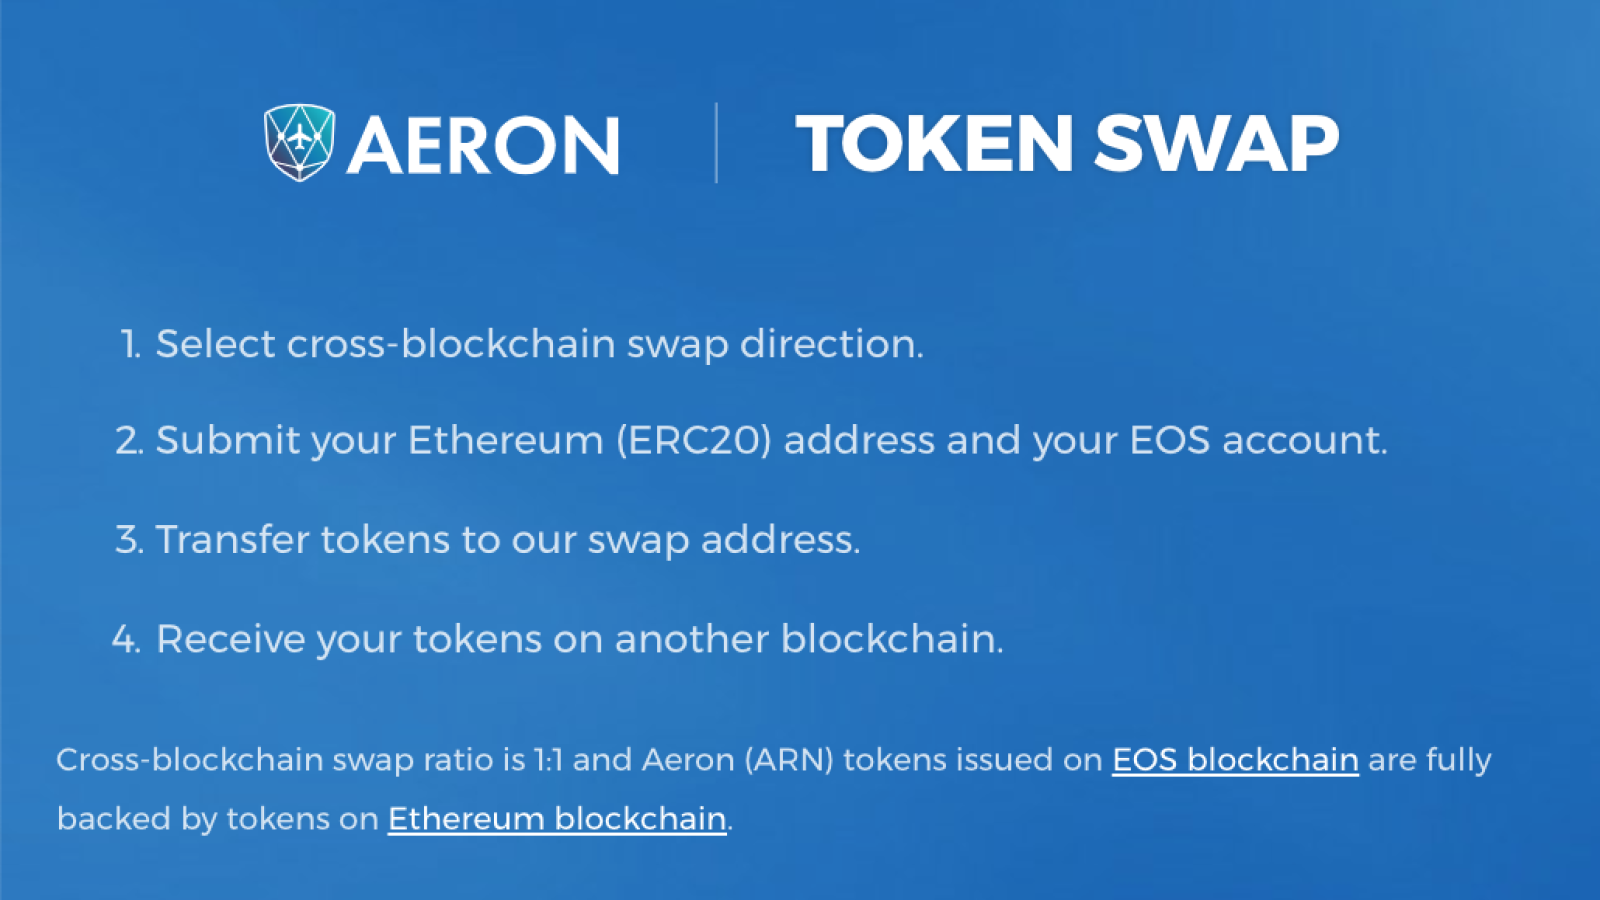 Step-by-step guide to ARN token swap